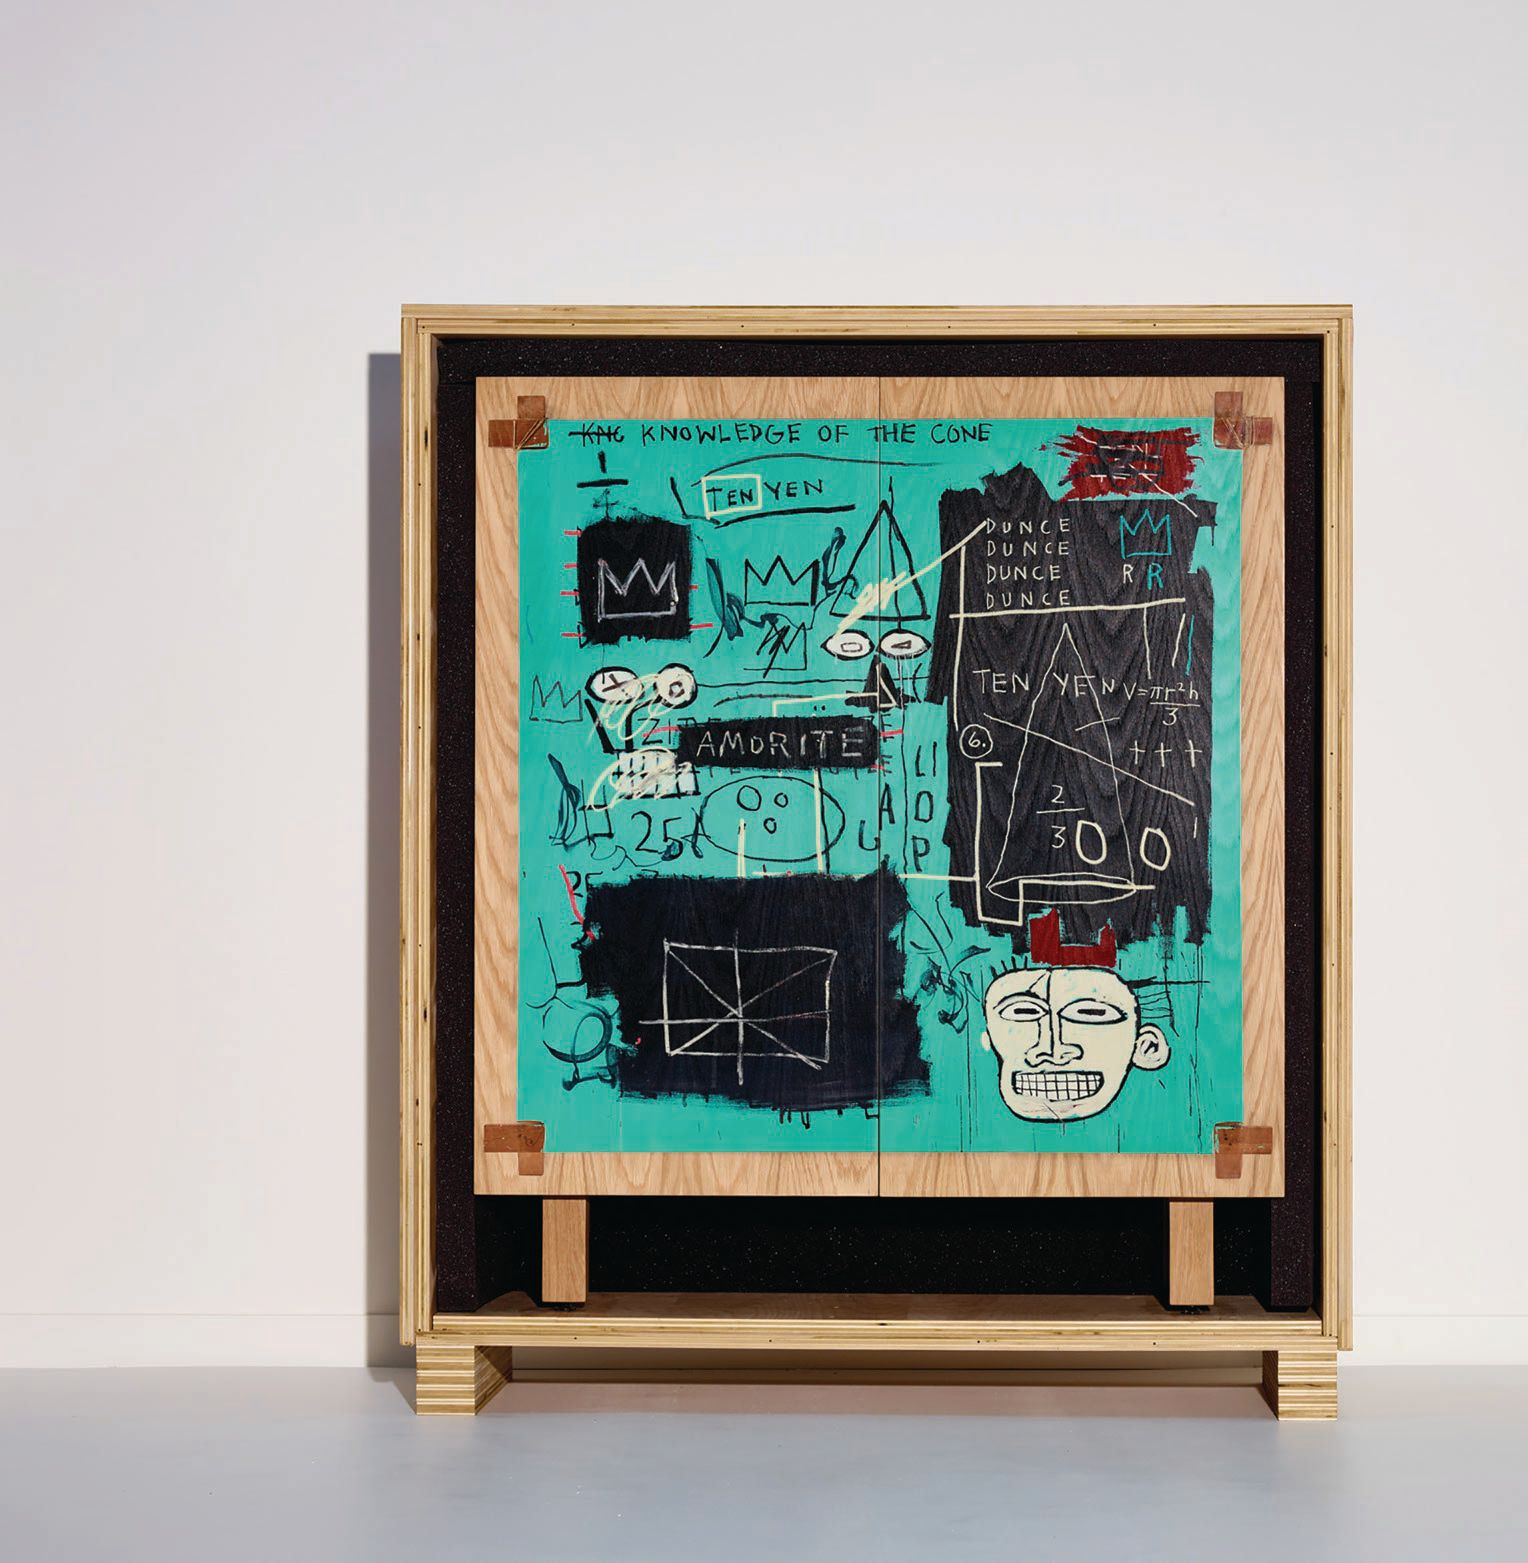 Crafted by hand from white oak, Tiffany & Co.’s 4-foot advent calendar features the artwork of Brooklyn-born artist Jean-Michel Basquiat, “Equals Pi.” PHOTO COURTESY OF BRAND